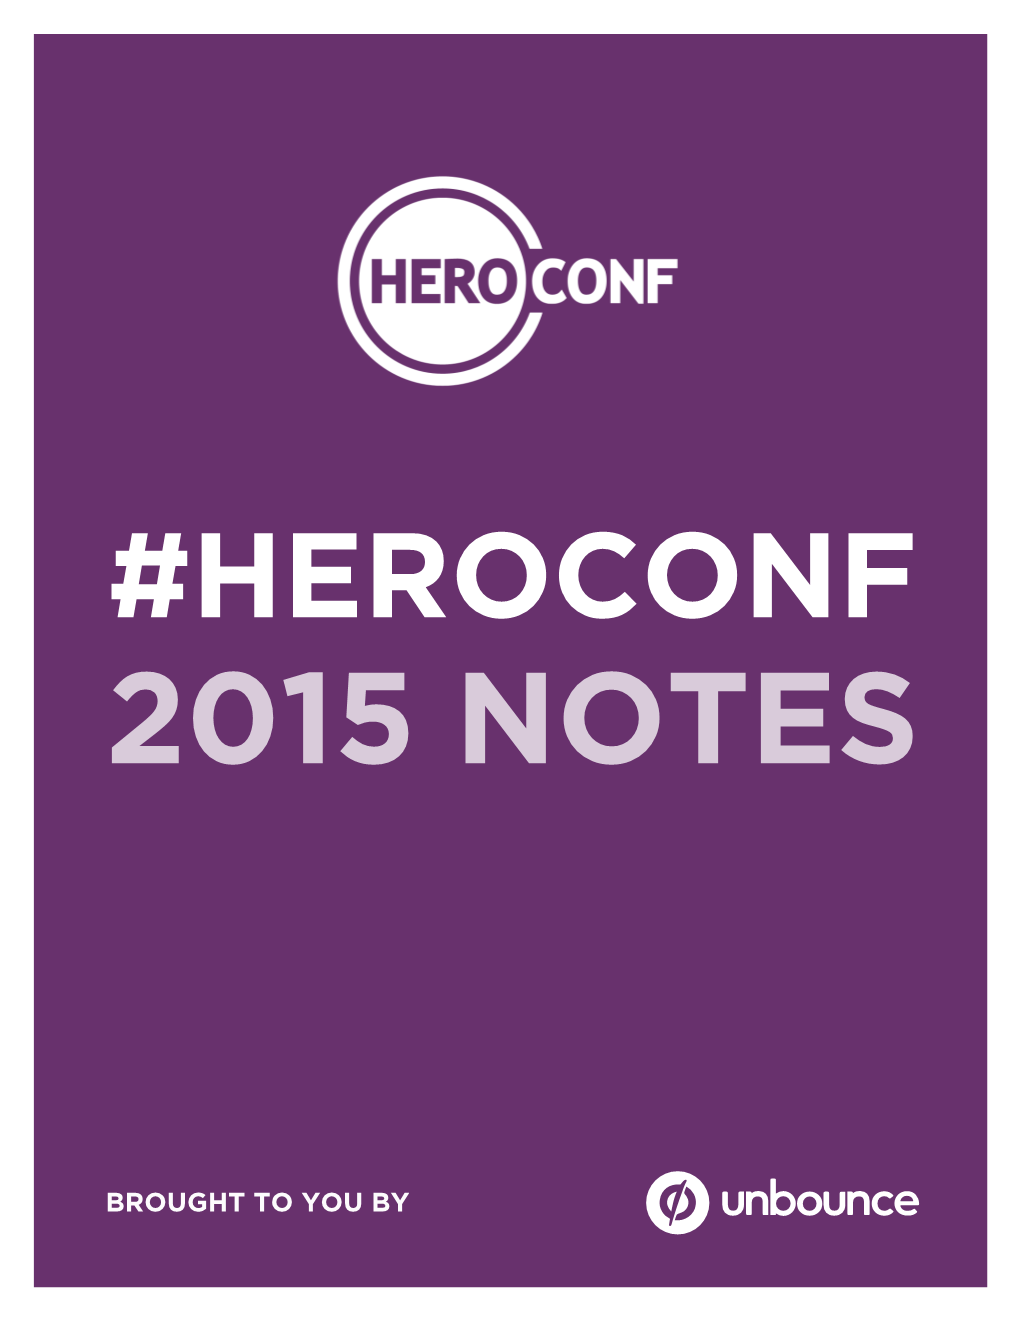 2015 Hero Conf Notes by Unbounce